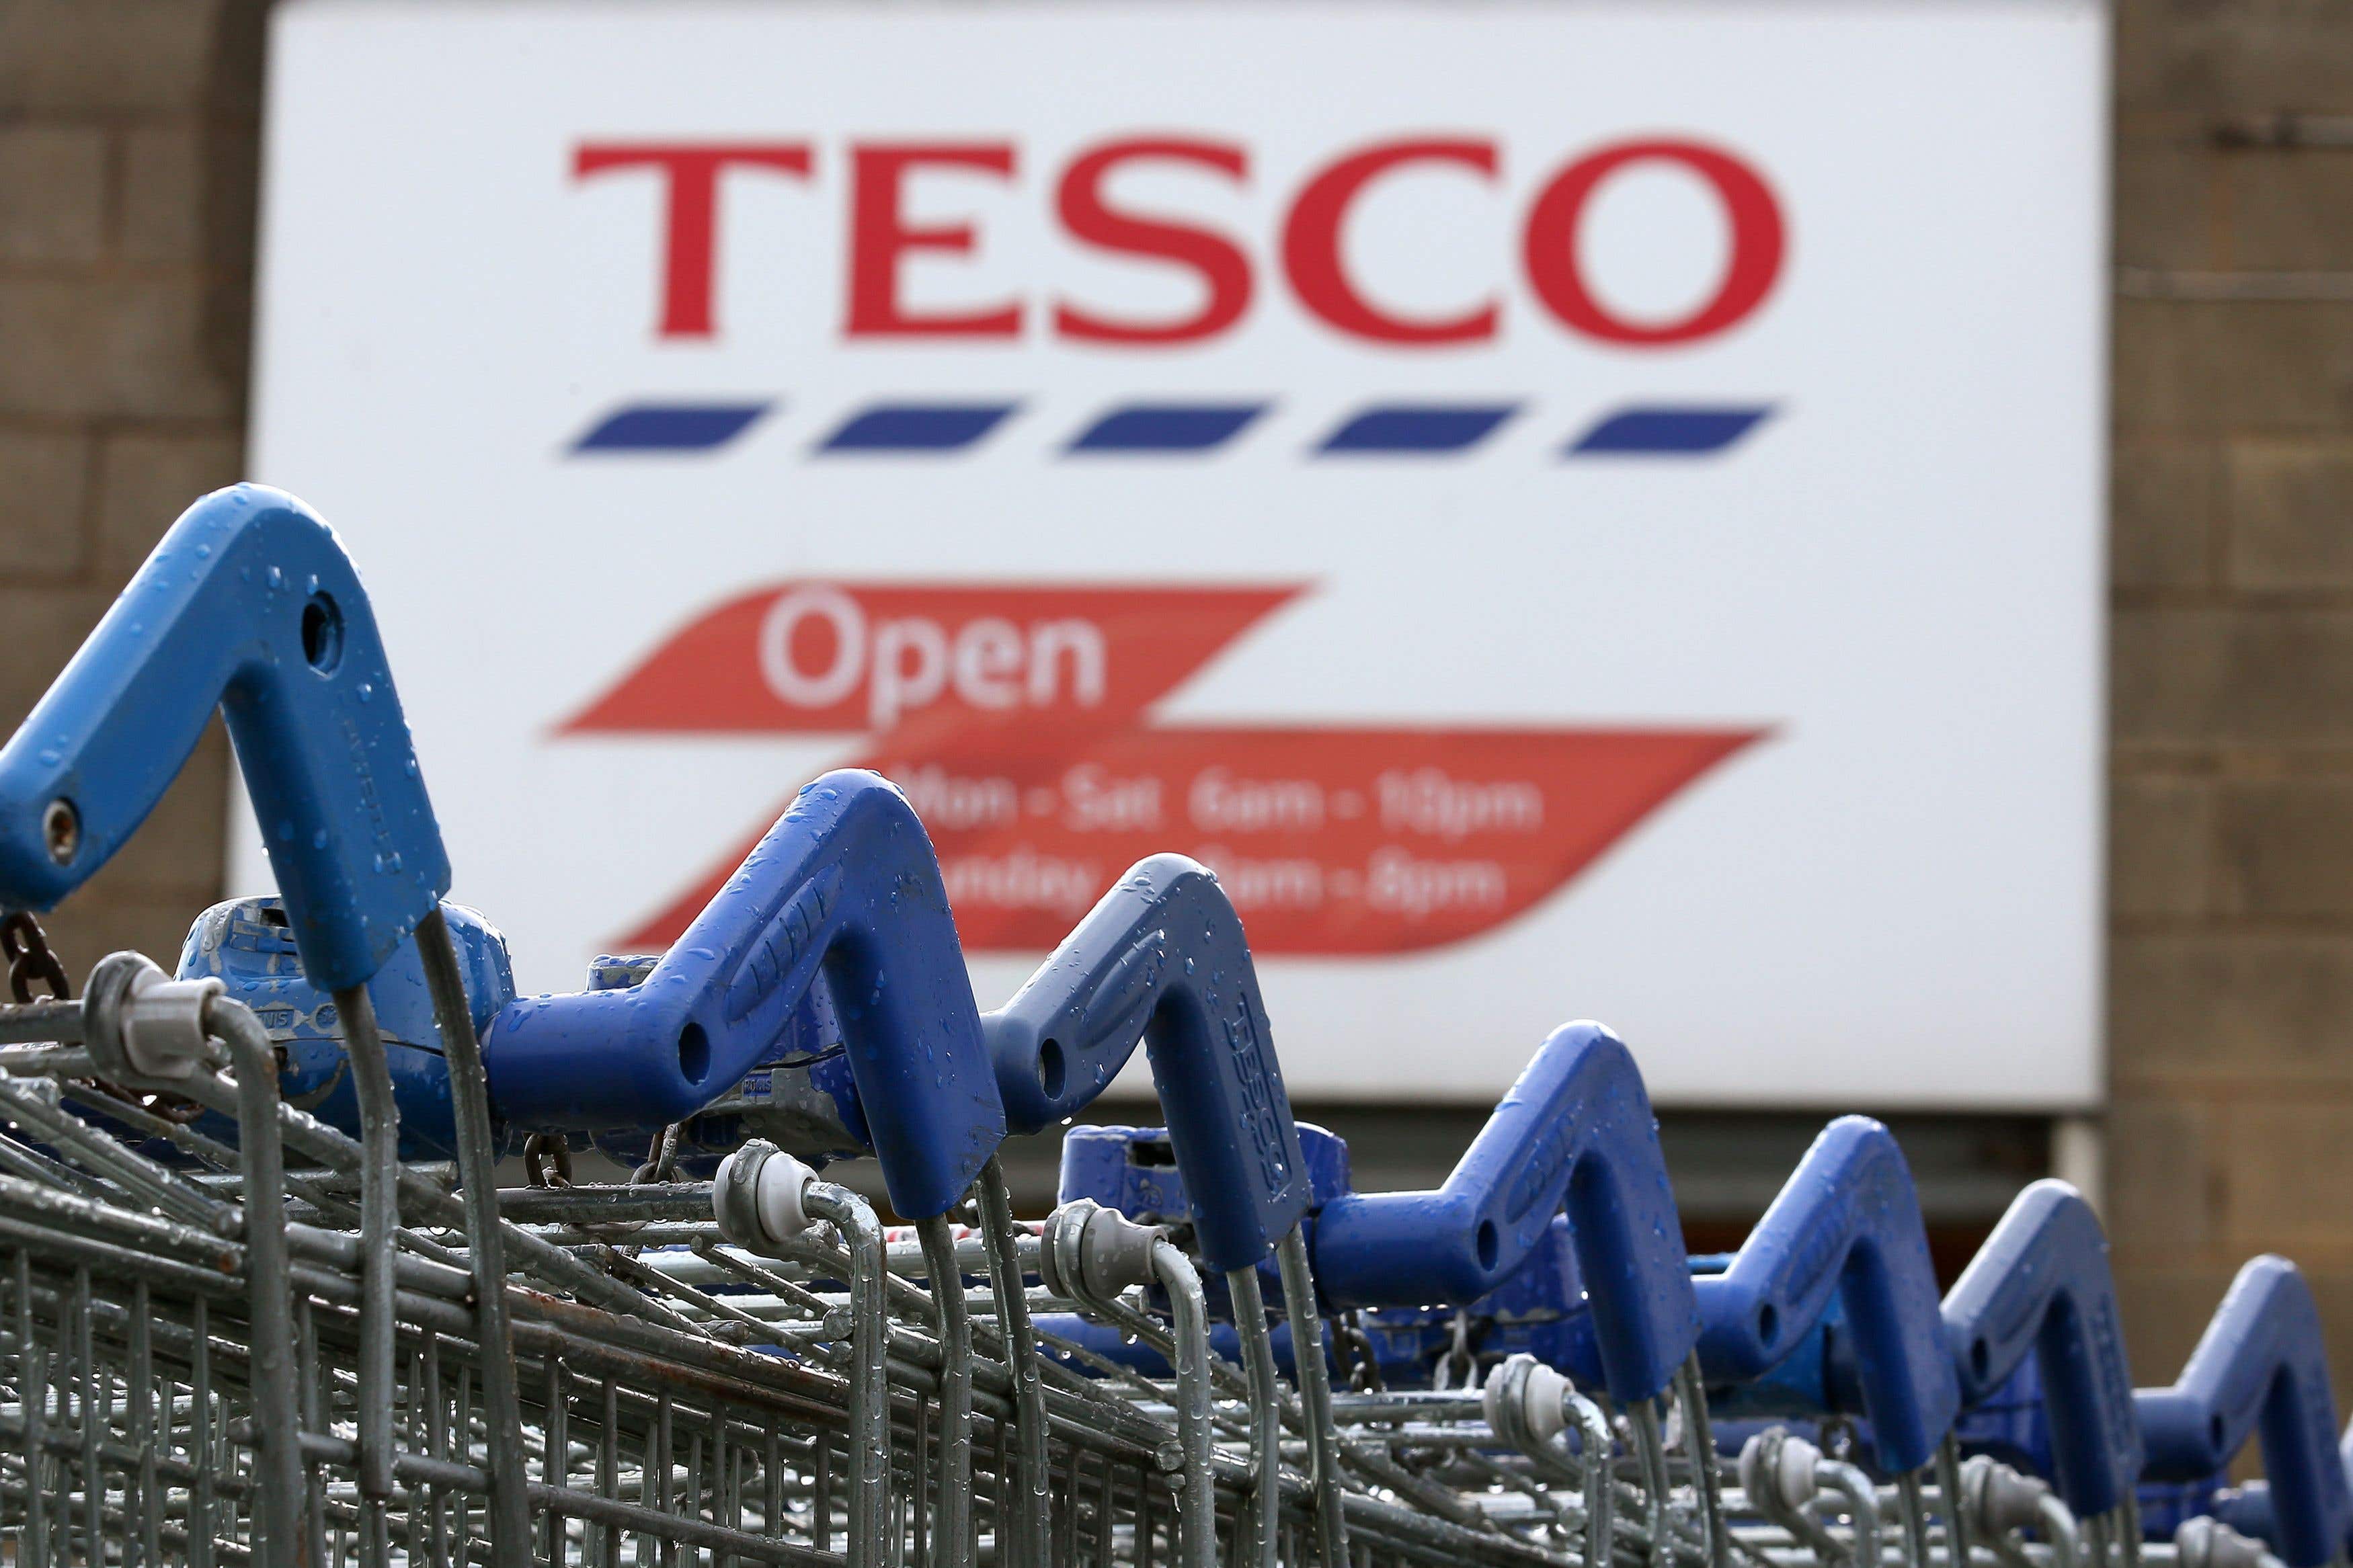 Tesco has announced an increase to the minimum spend customers must reach to qualify for delivery